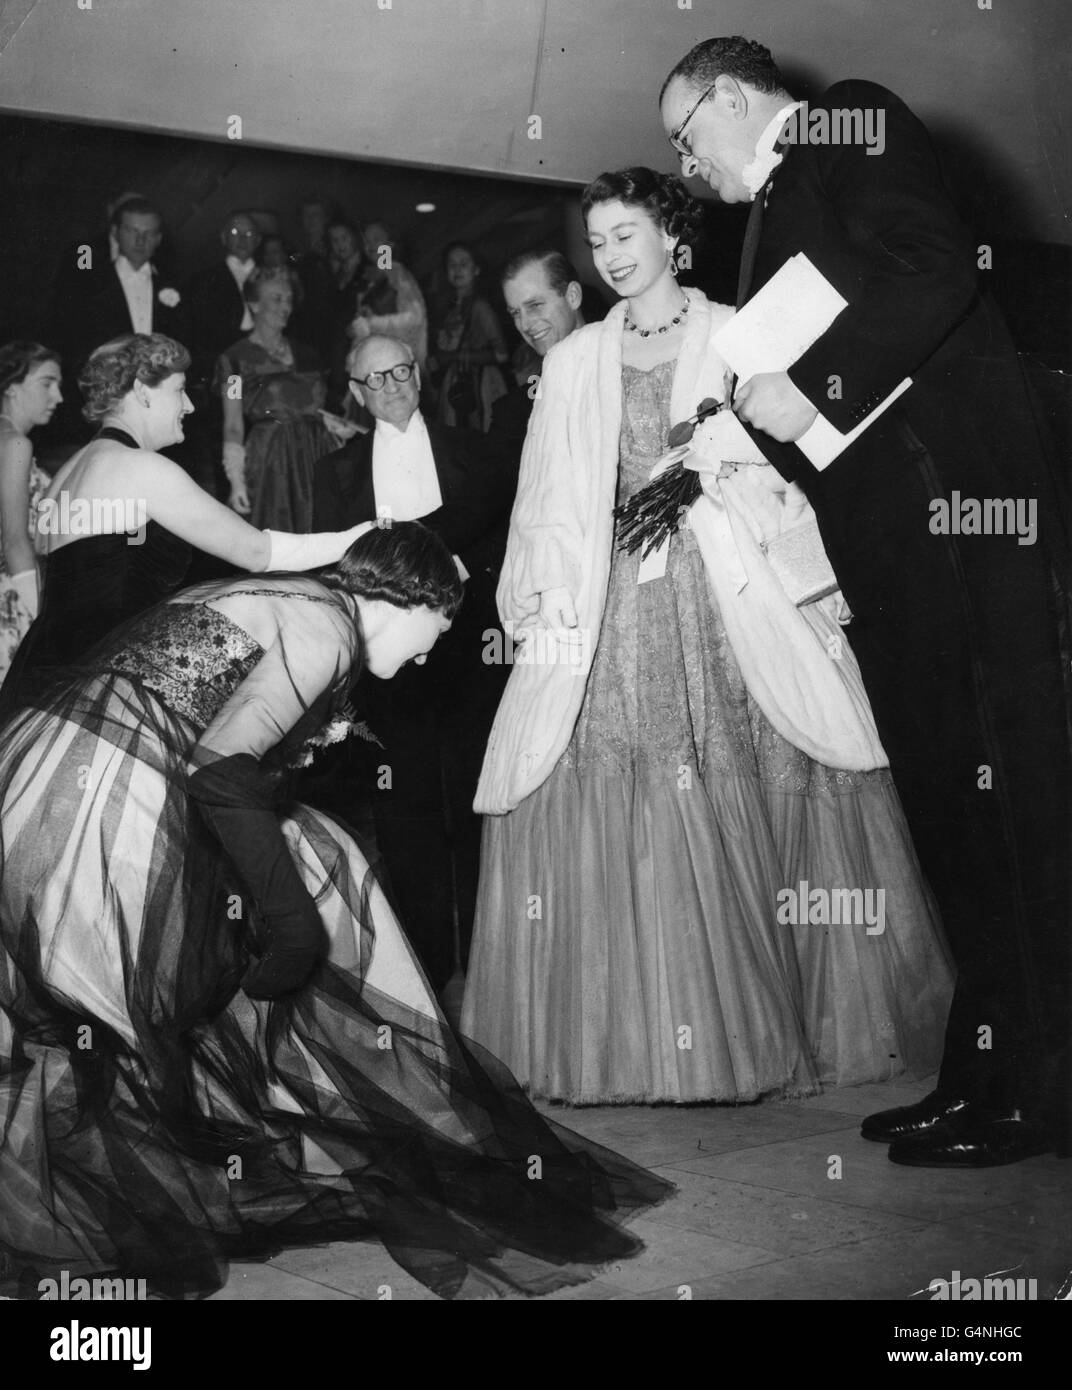 Queen Elizabeth II leaves the Festival Hall after attending the first royal concert of her reign. The concert was in aid of the Musicians' Benevolent Fund. Stock Photo